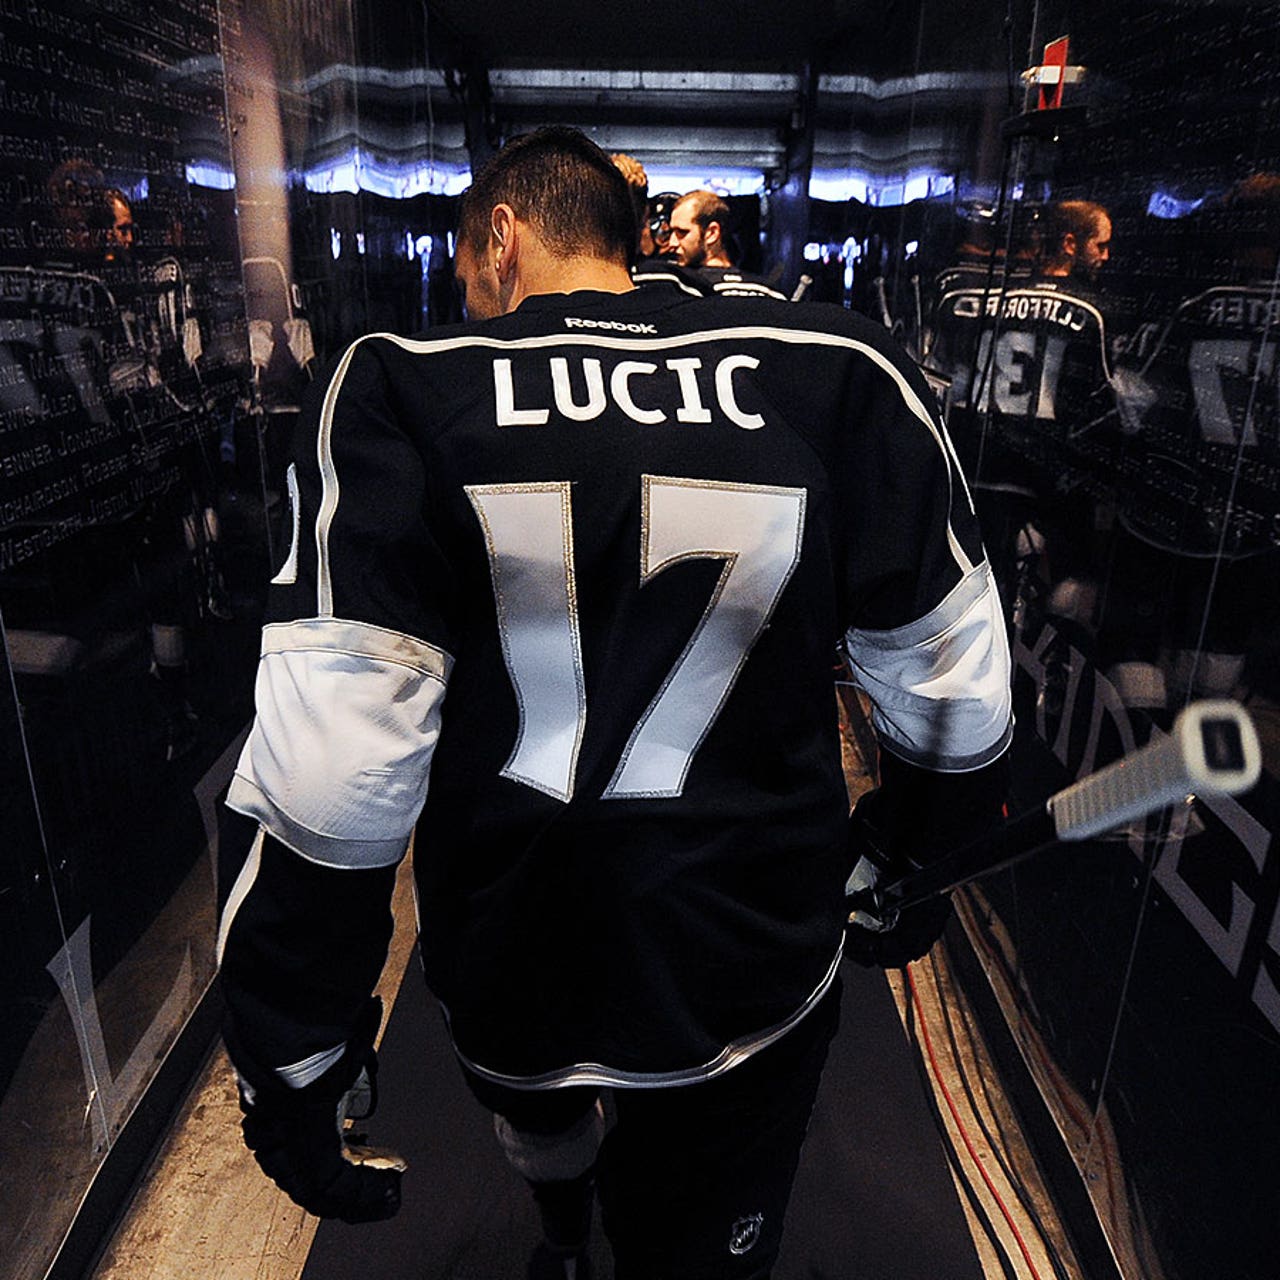 Bruins reportedly sign Milan Lucic to one-year, $1 million contract